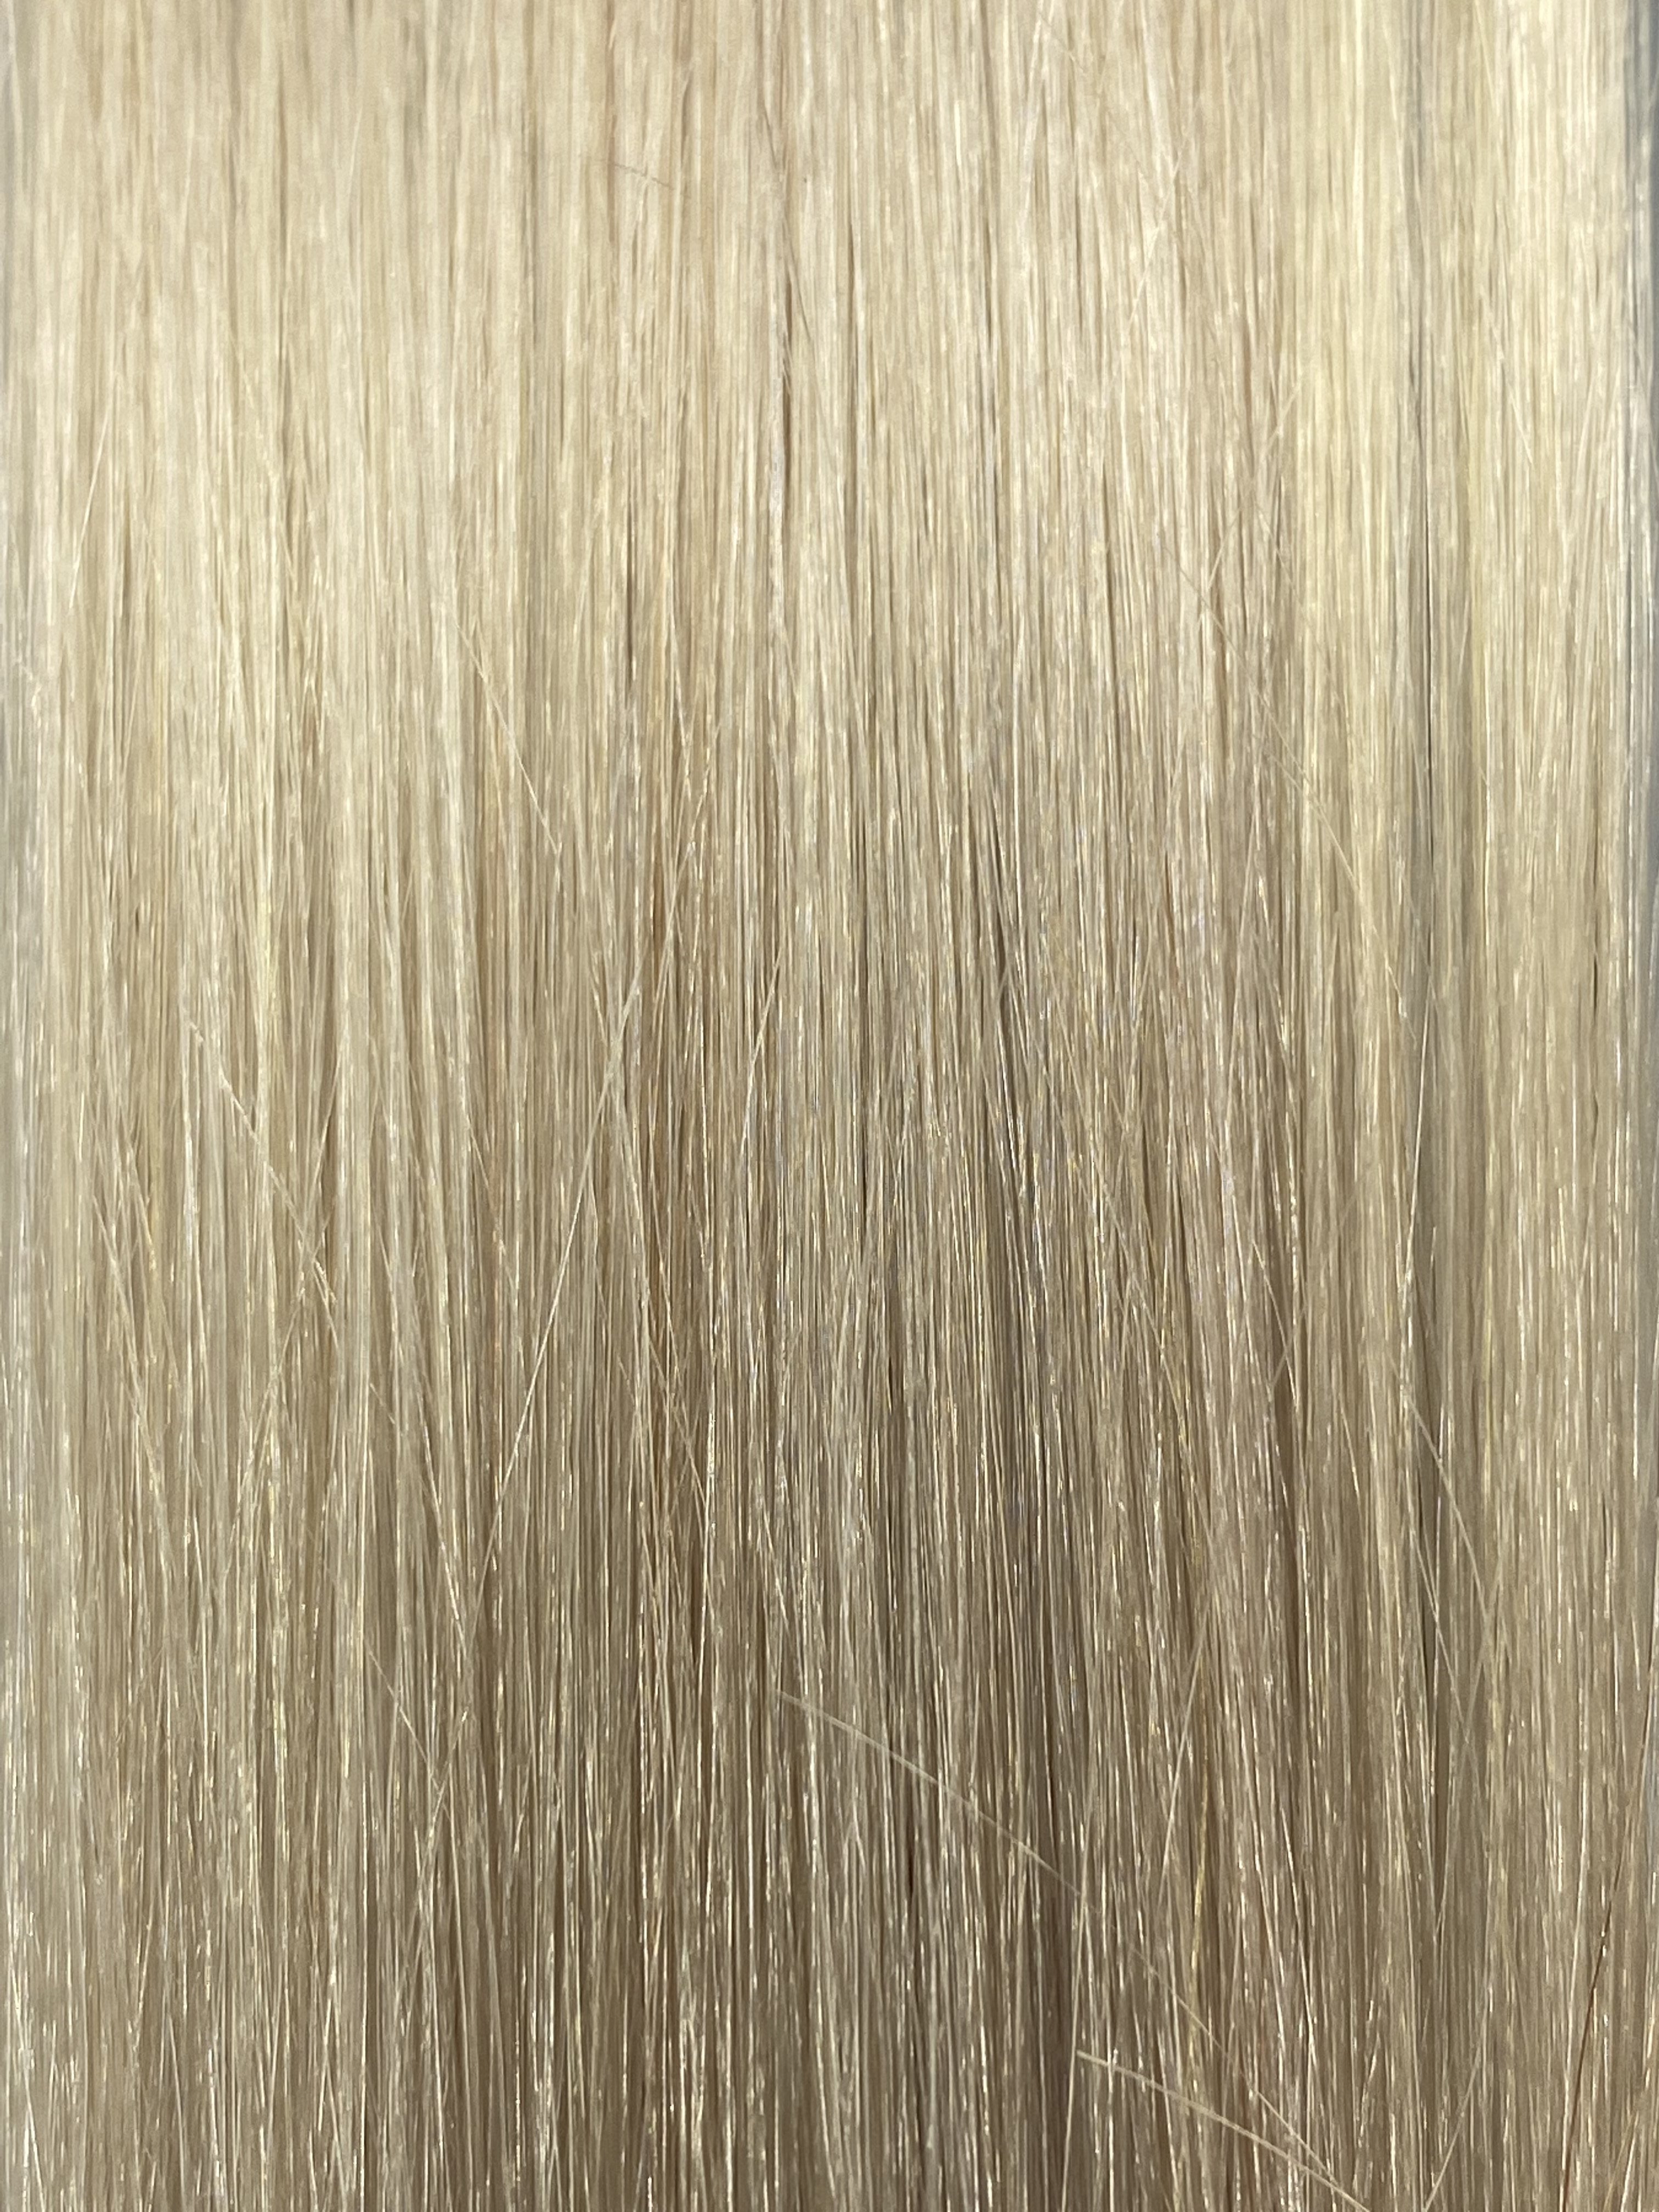 FUSION #1004 ULTRA VERY LIGHT PLATINUM BLONDE 40CM/ 16 INCHES  - 17.5 GRAMS - Image 1